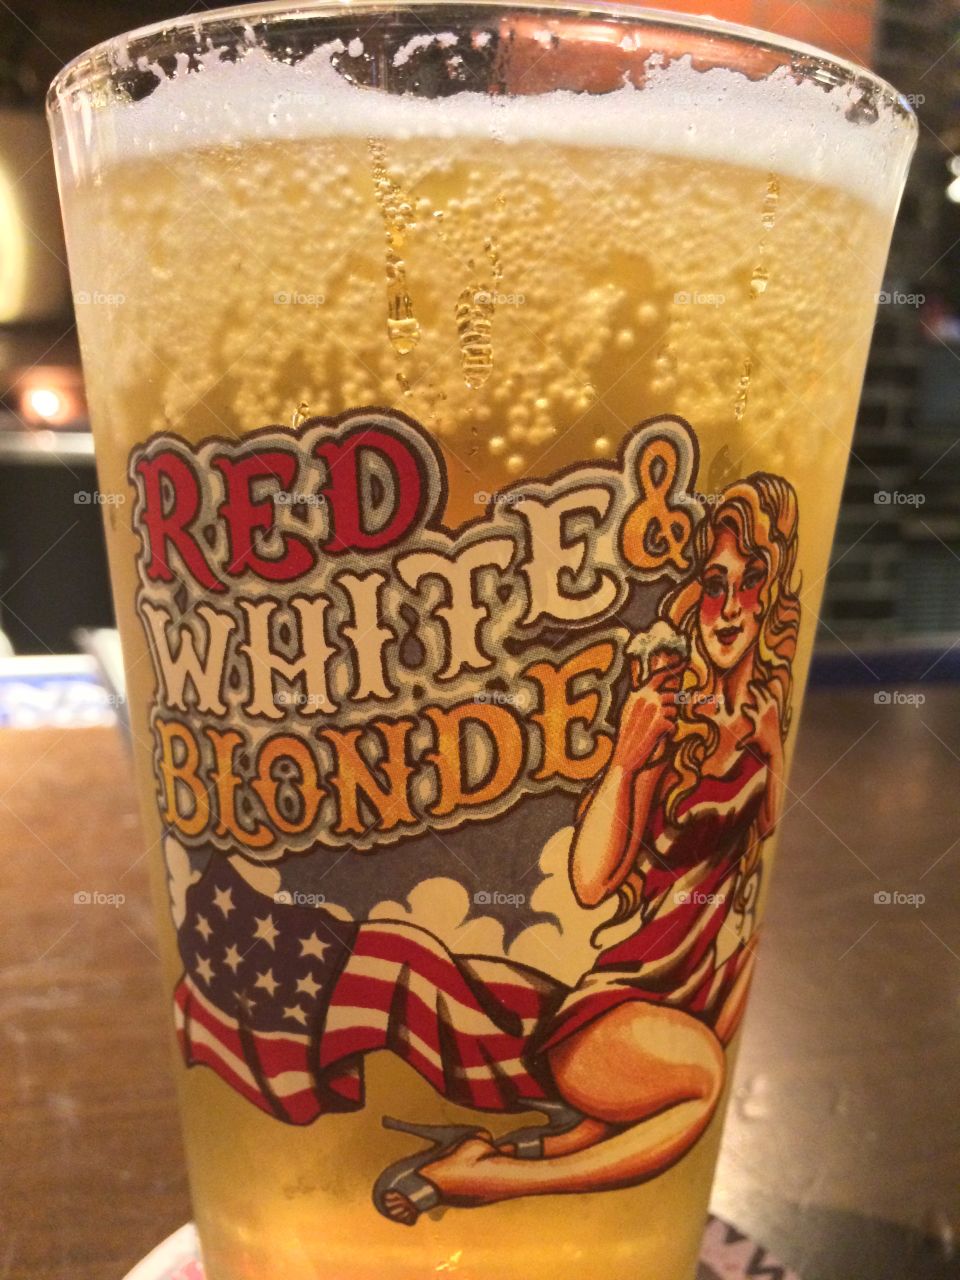 Hard Cider in a Glass. Took this photo at the Guy Fierri bar and grill in Manhattan.